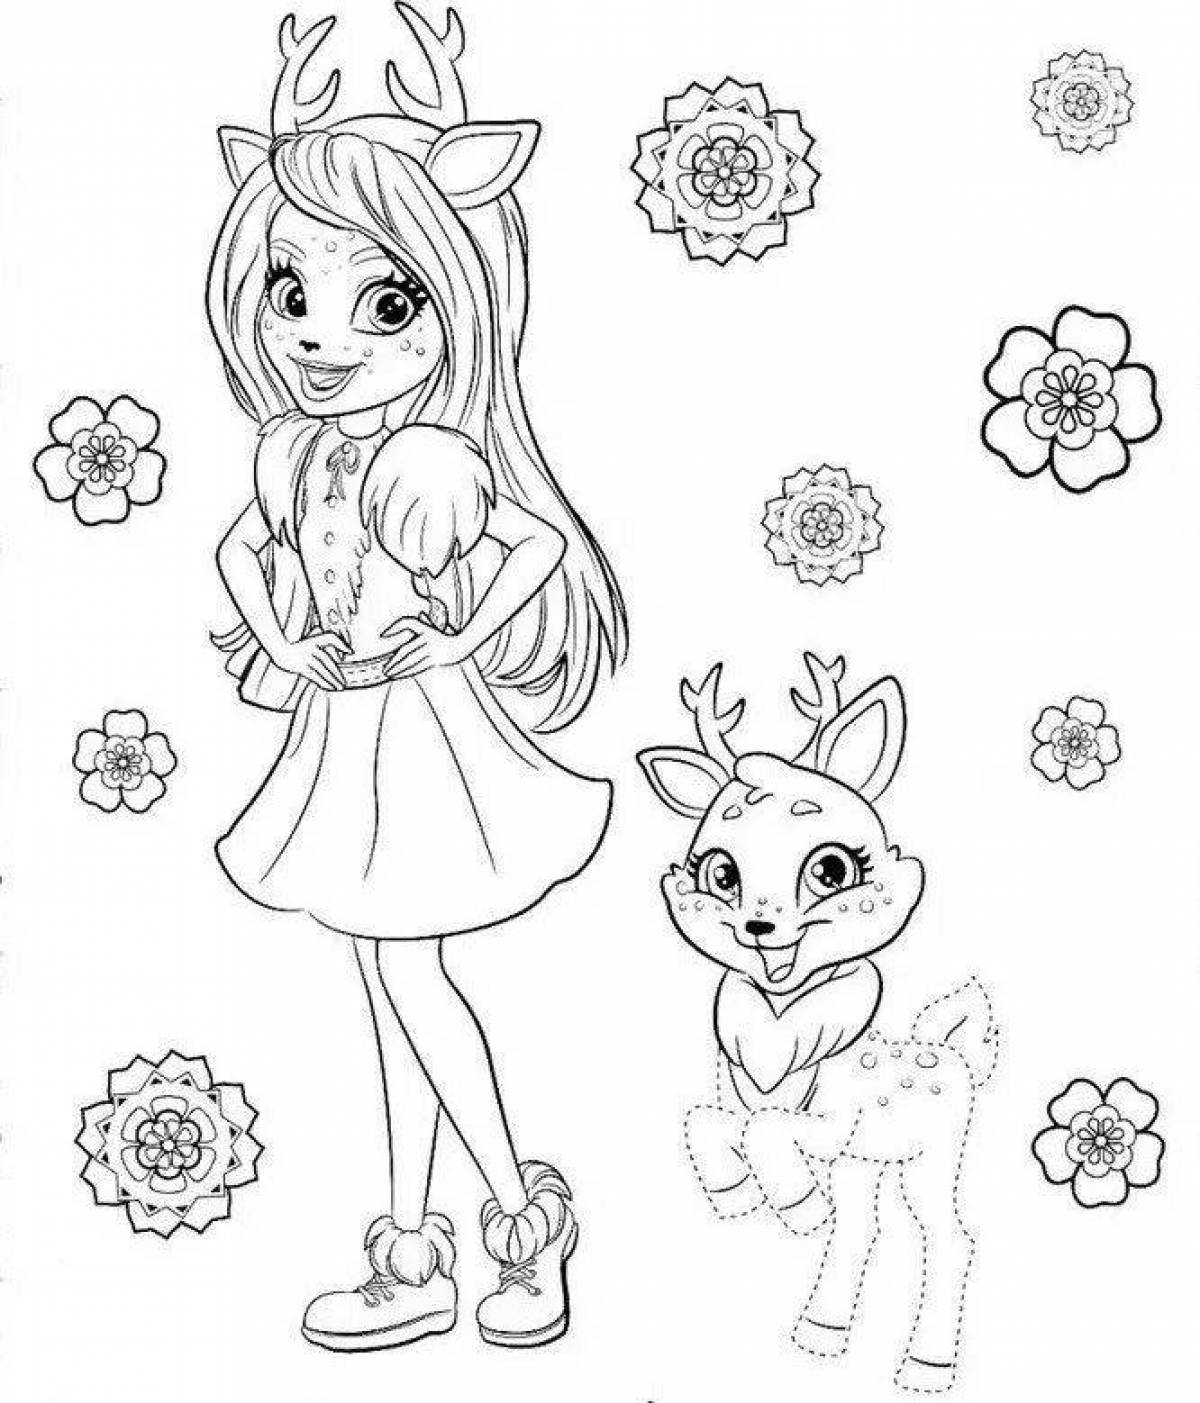 Enchansimals colorful coloring pages